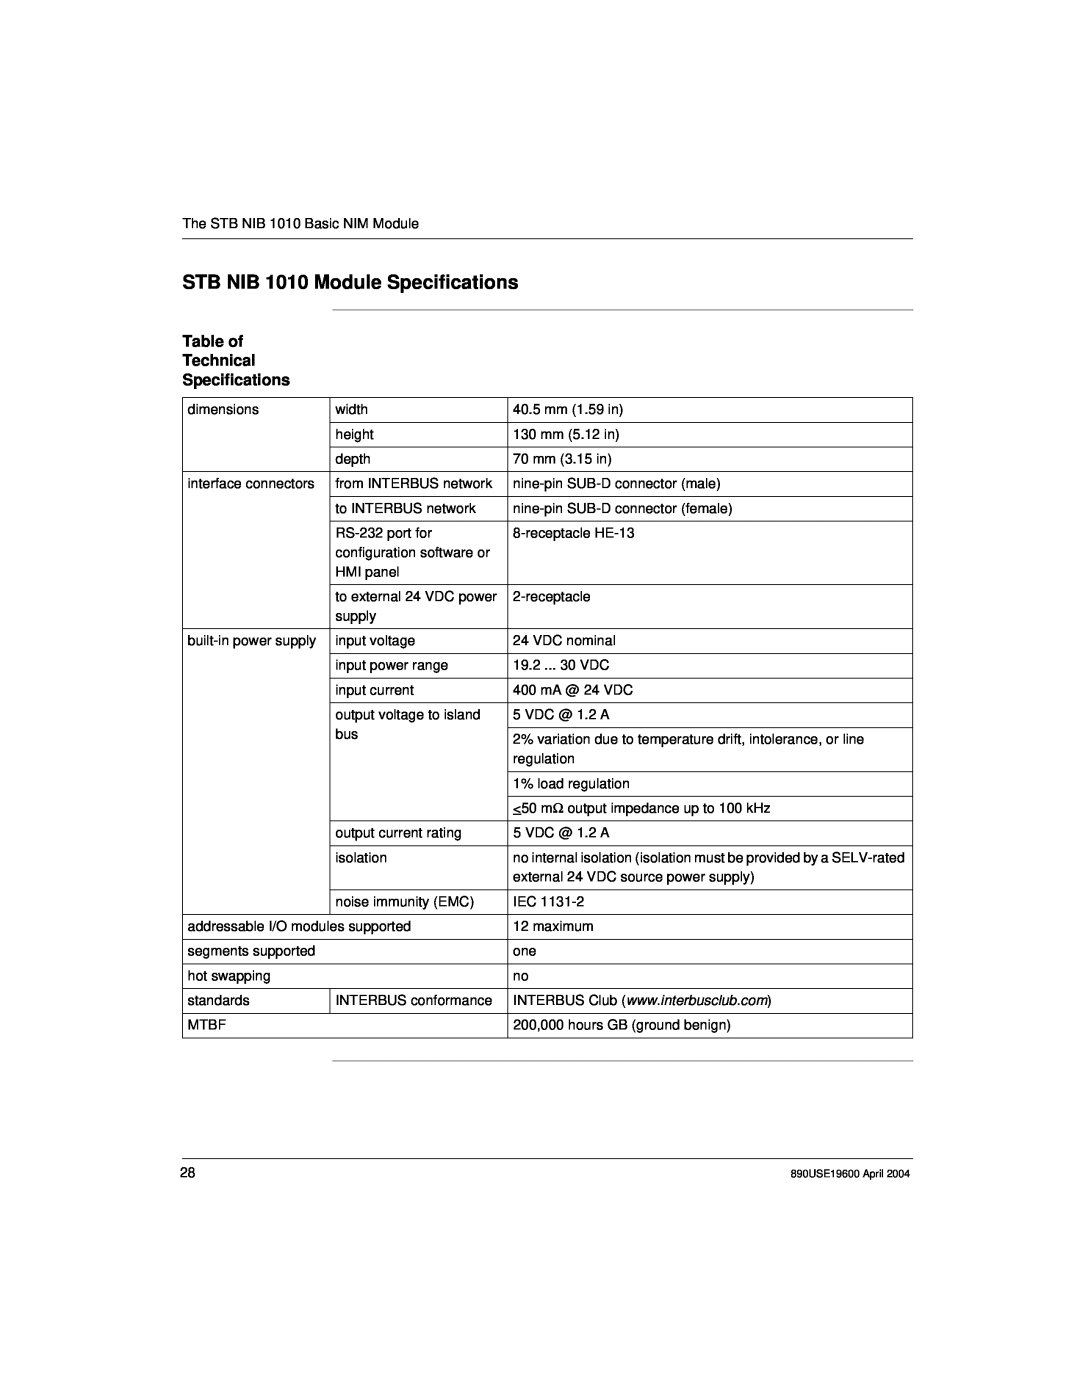 Schneider Electric 890USE19600 Version 1.0 manual STB NIB 1010 Module Specifications, Table of Technical Specifications 